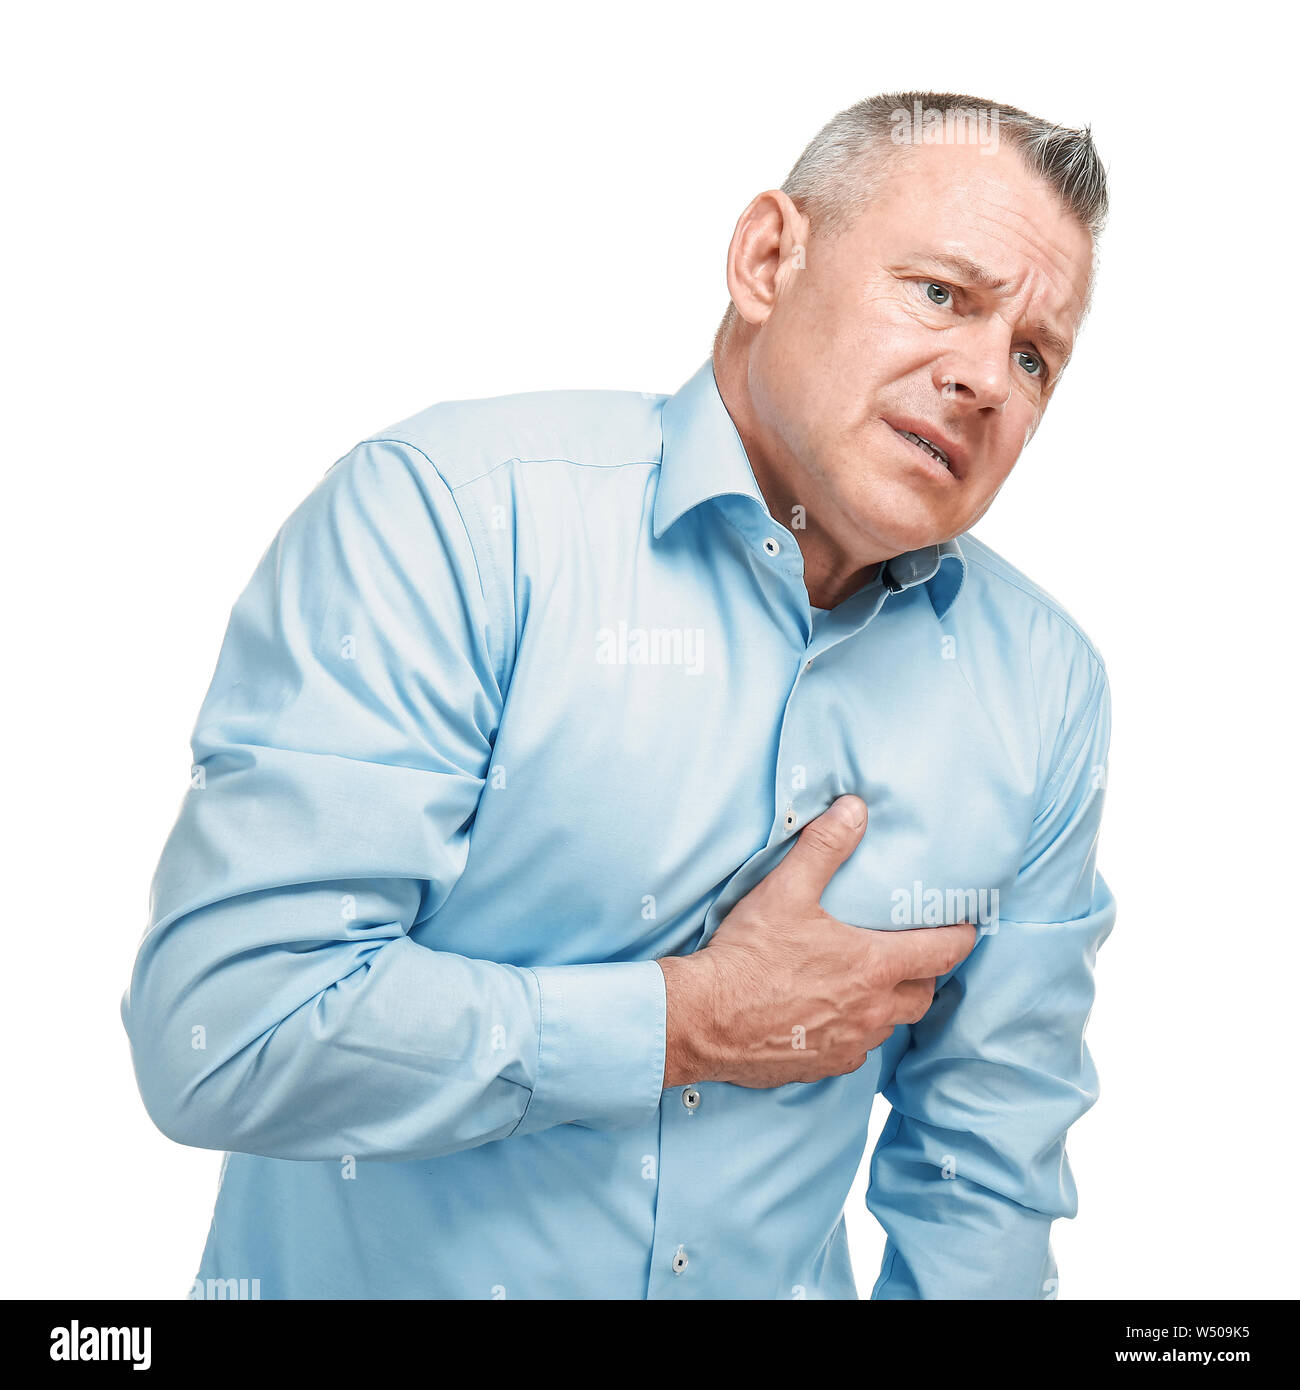 Handsome middle-aged man having heart attack on white background Stock Photo